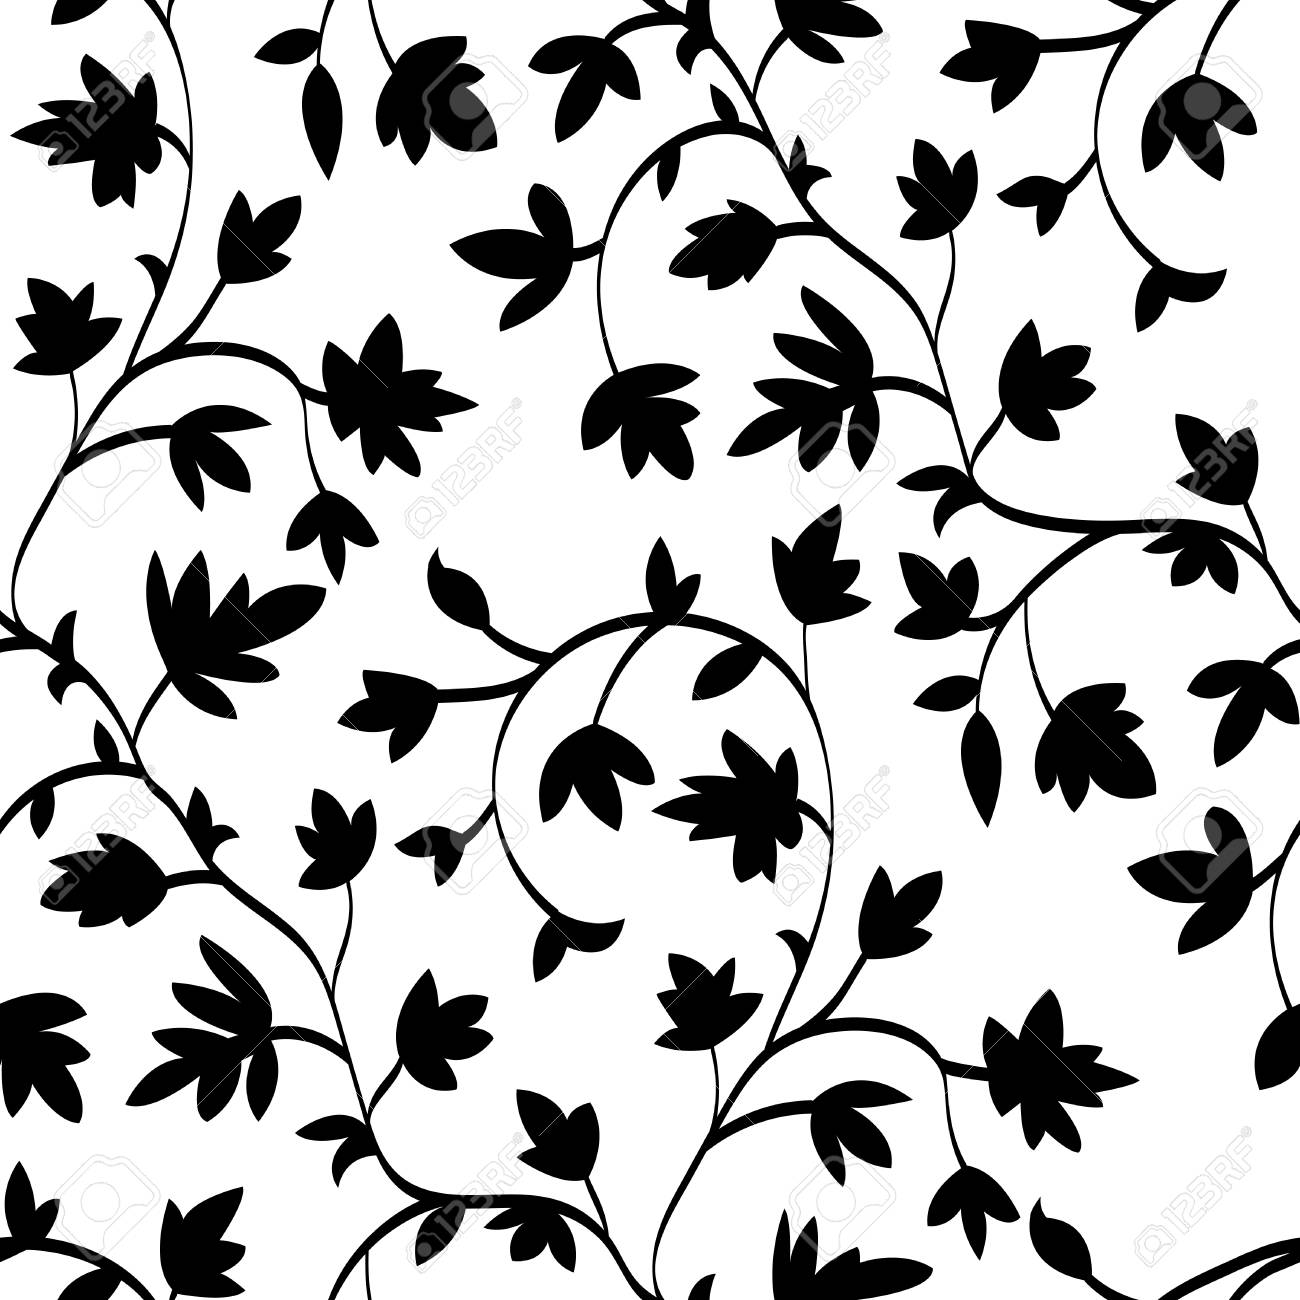 Seamless Floral Pattern With Branches And Leaves Abstract Texture